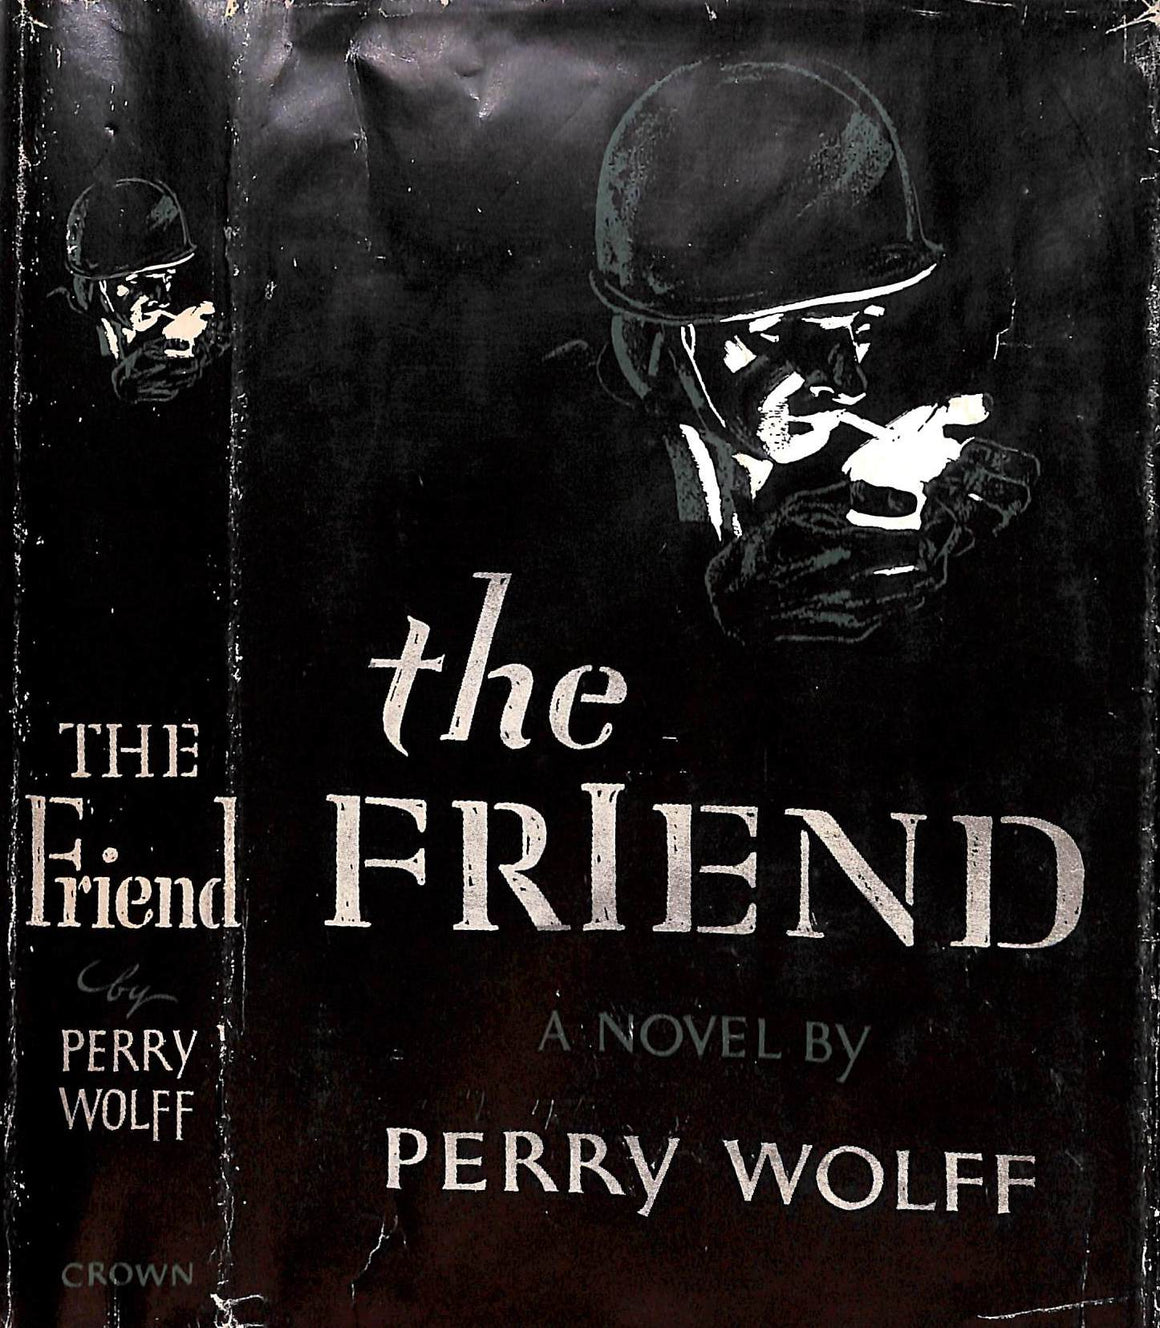 "The Friend" 1950 WOLFF, Perry